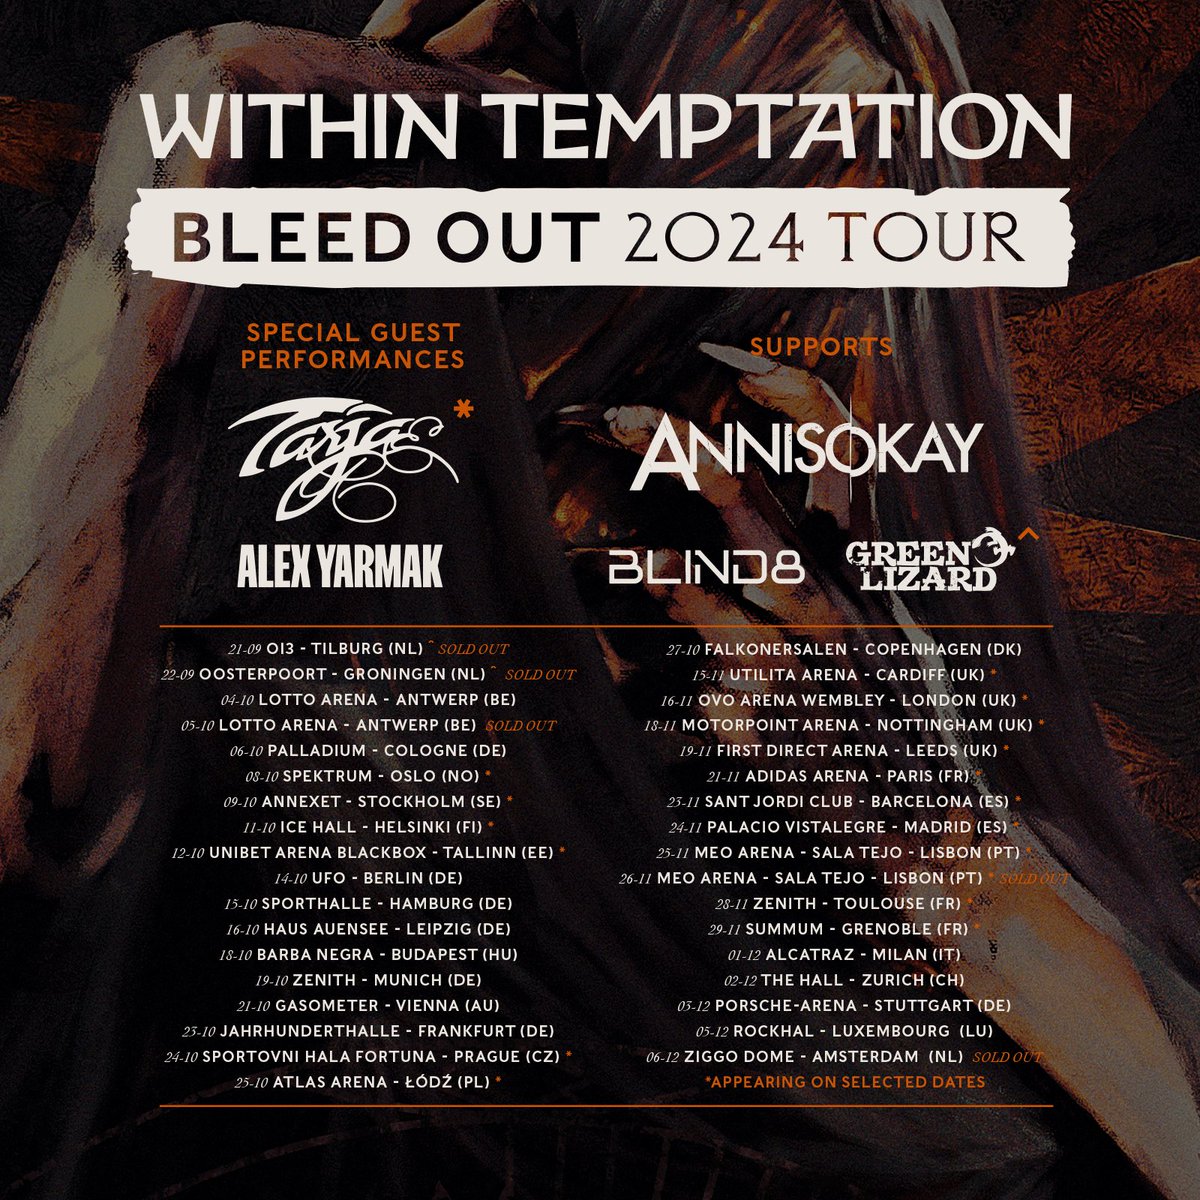 Within Temptation Bleed Out 2024 Tour

Within Temptation is thrilled to unveil the artists accompanying them on their “Bleed Out 2024 Tour”.
Joining the band on this tour will be Within Temptation’s recent collaborative artists: Tarja Turunen, Annisokay, Blind8 and Gren Lizard.